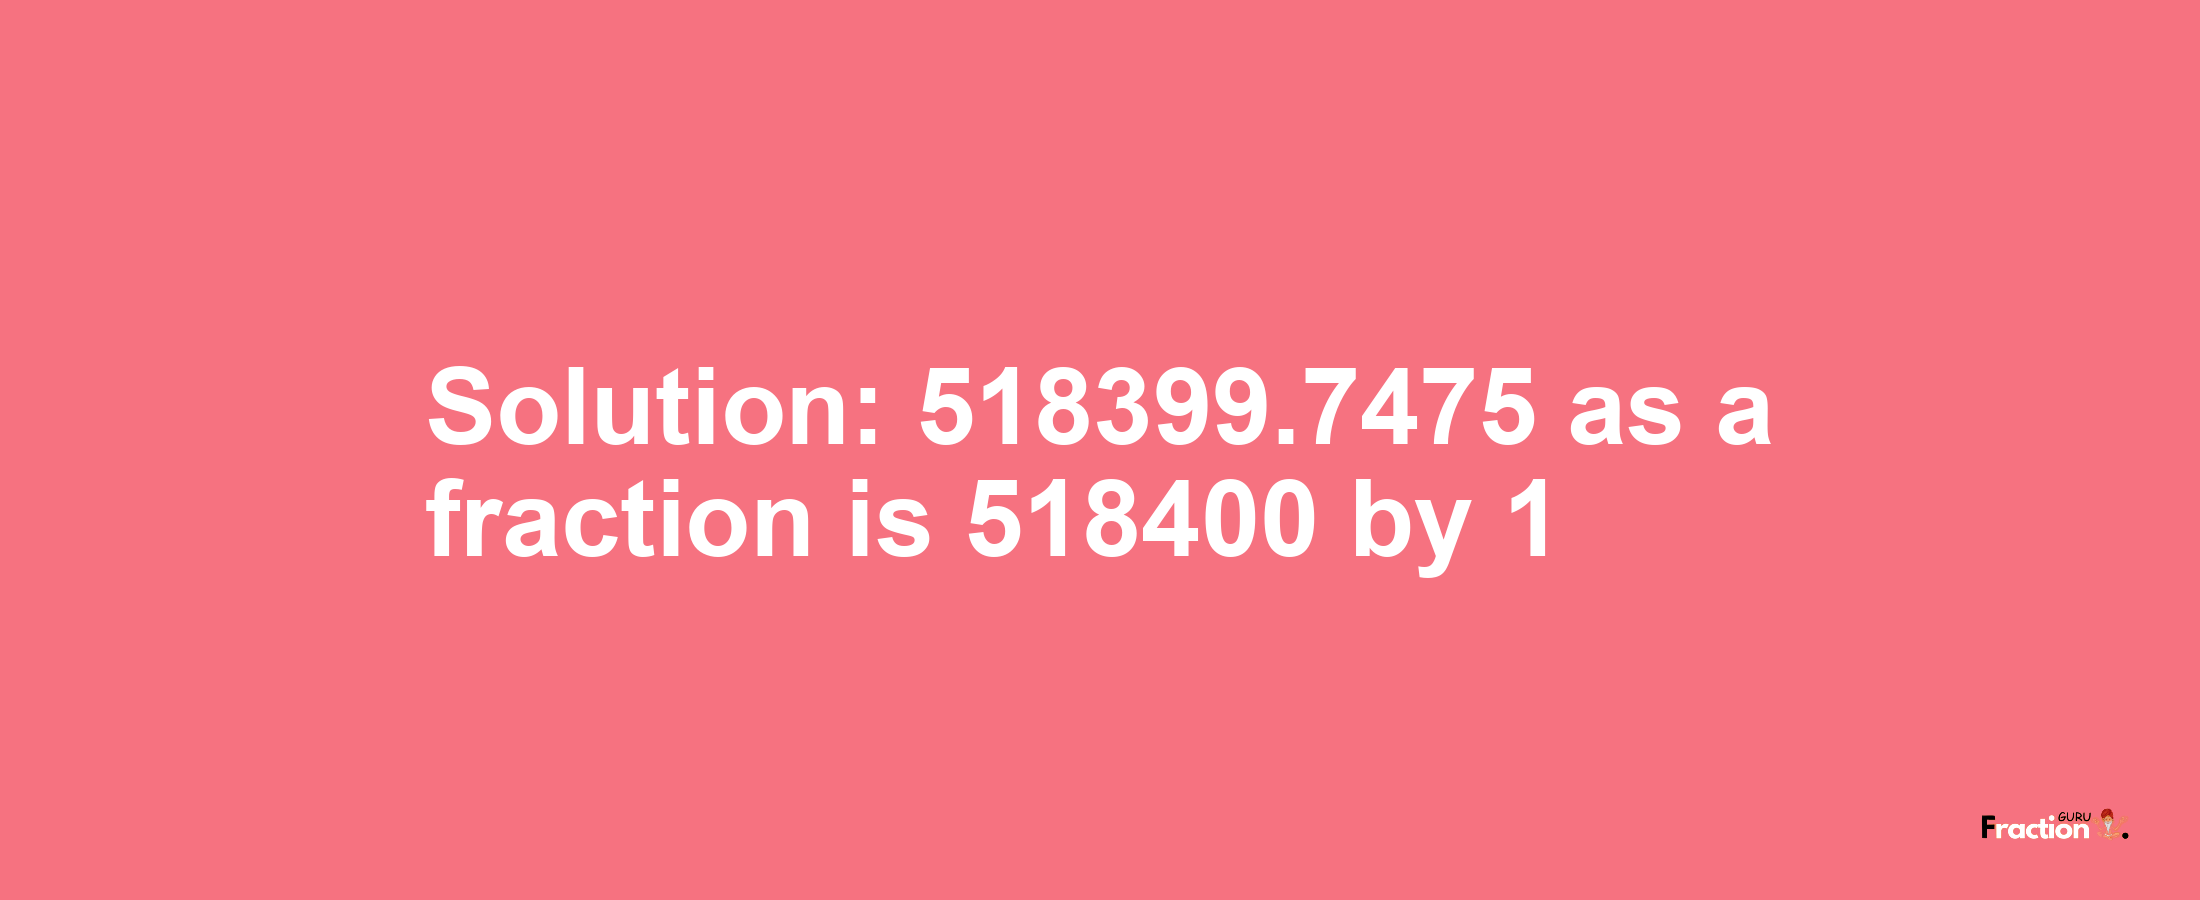 Solution:518399.7475 as a fraction is 518400/1